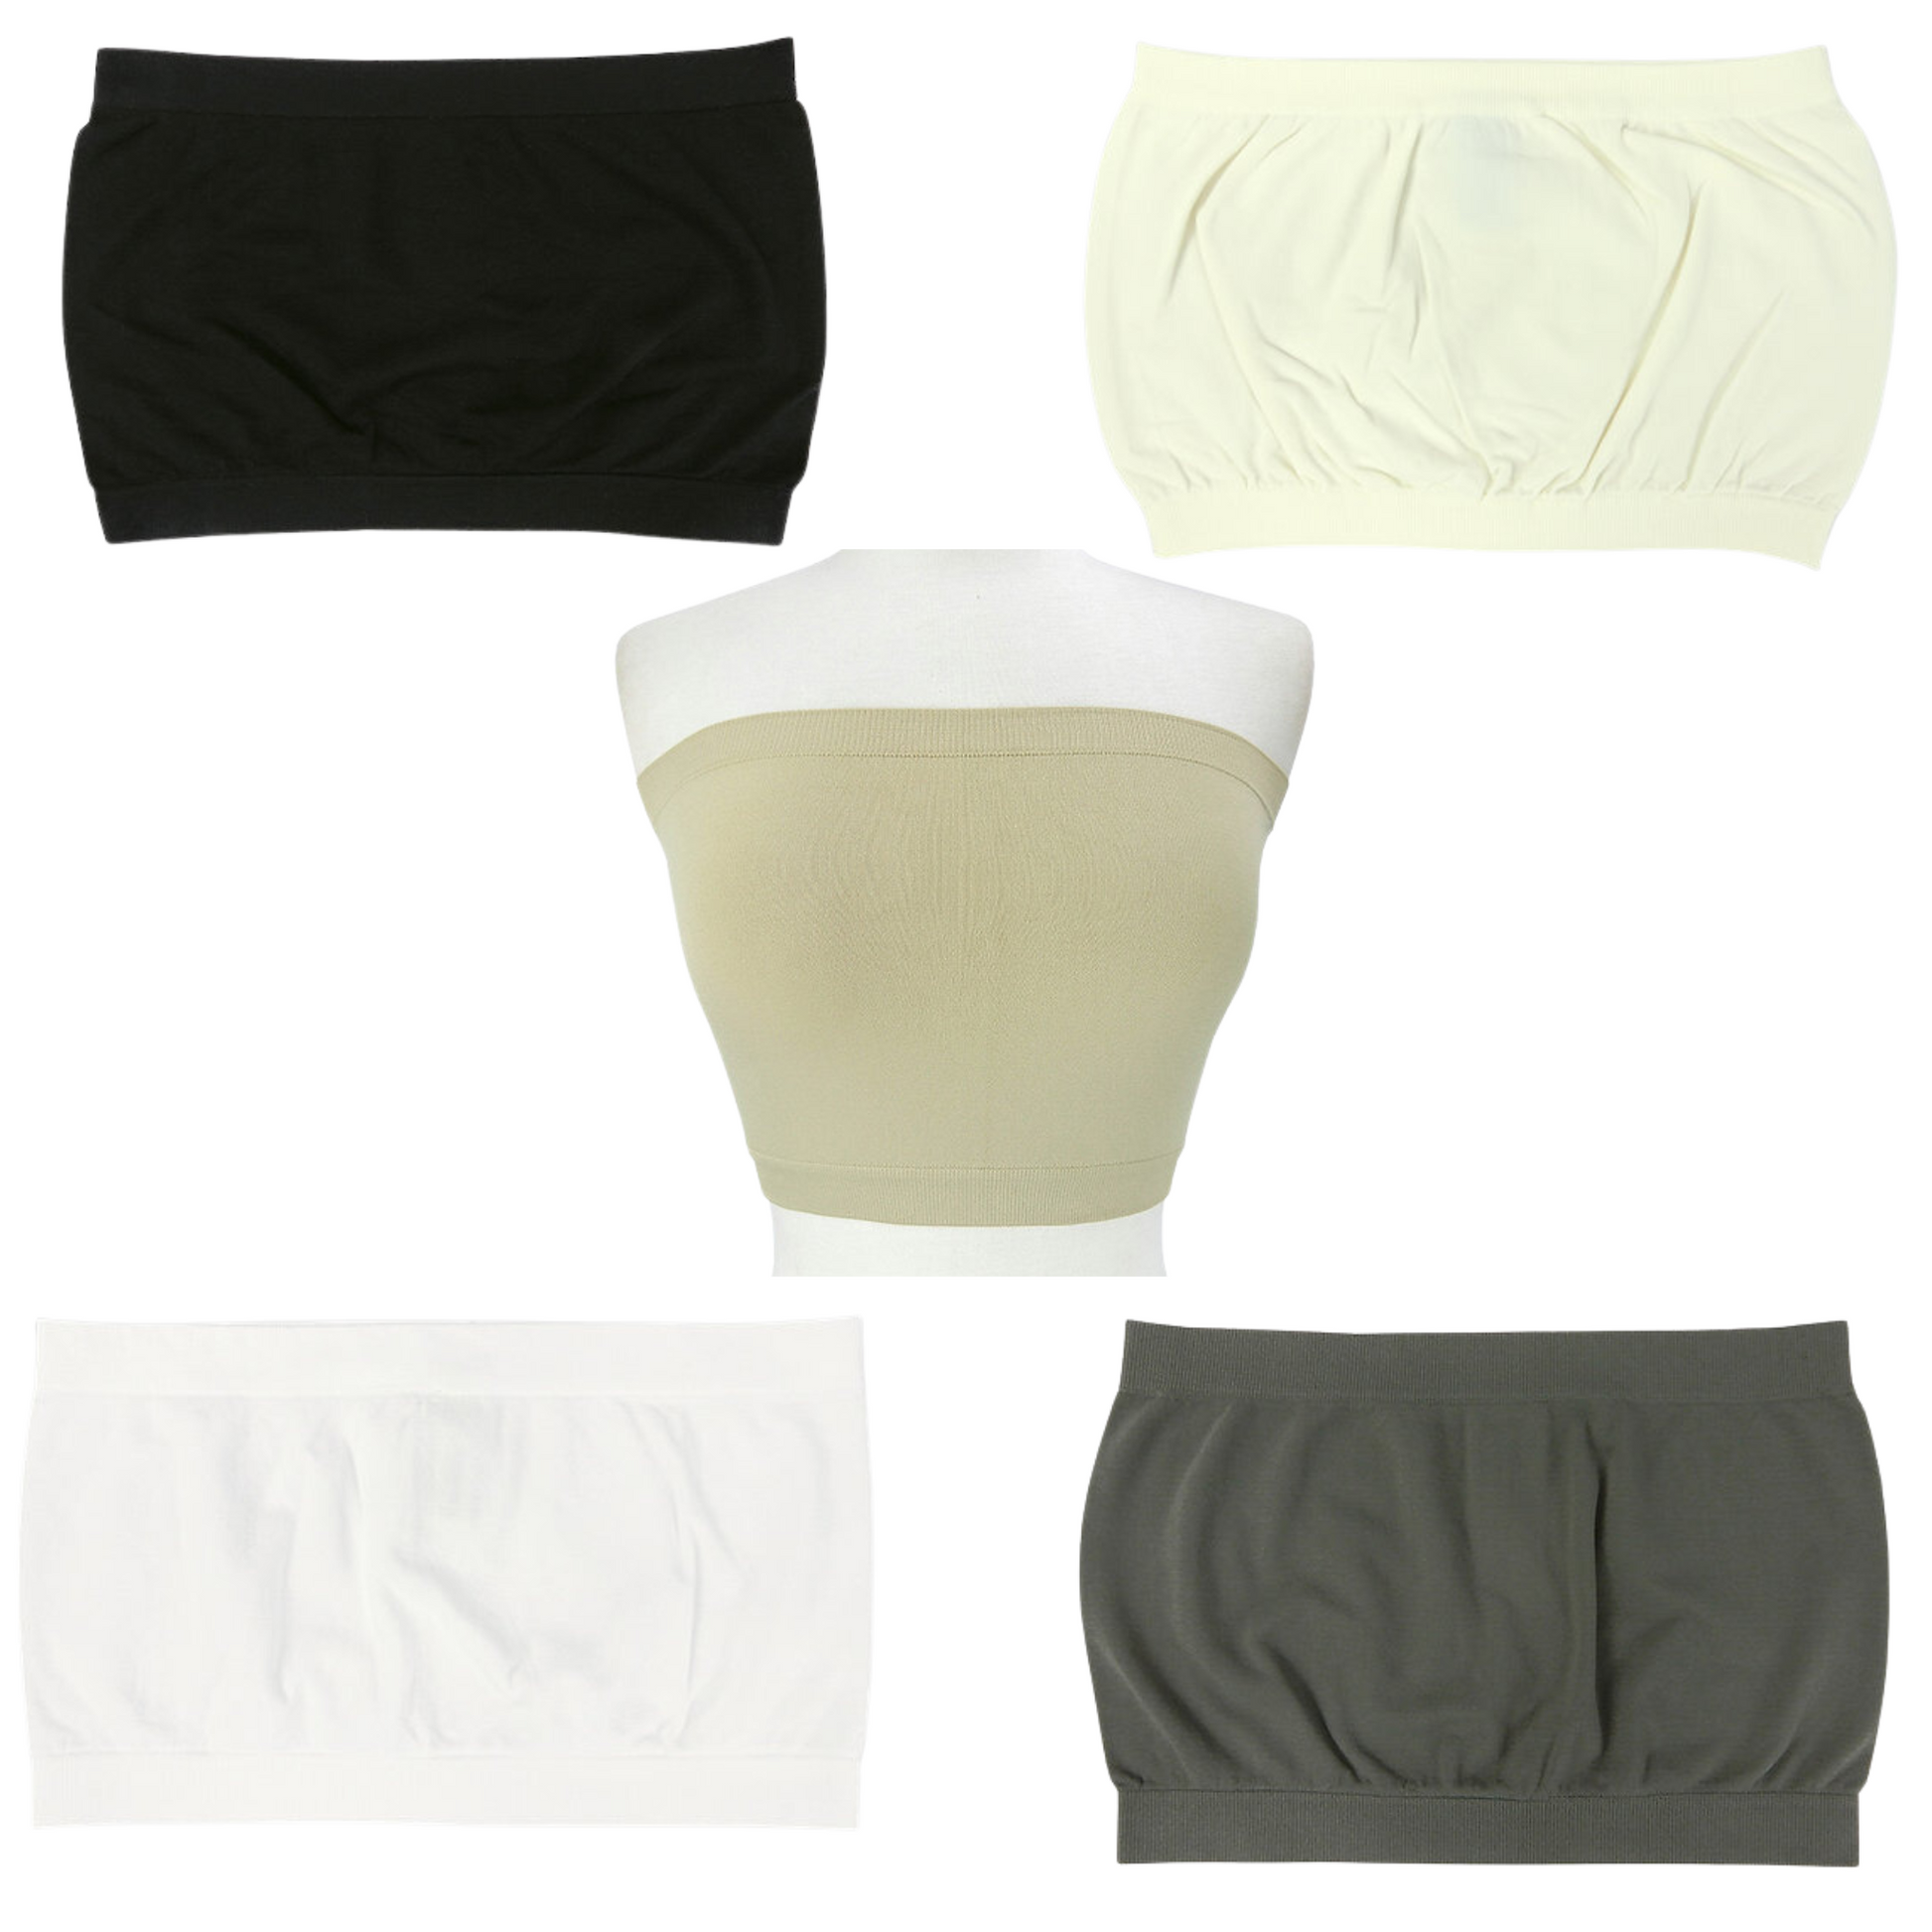 butter soft bandeau in a variety of colors. Available in black, ivory, nude, white, and grey